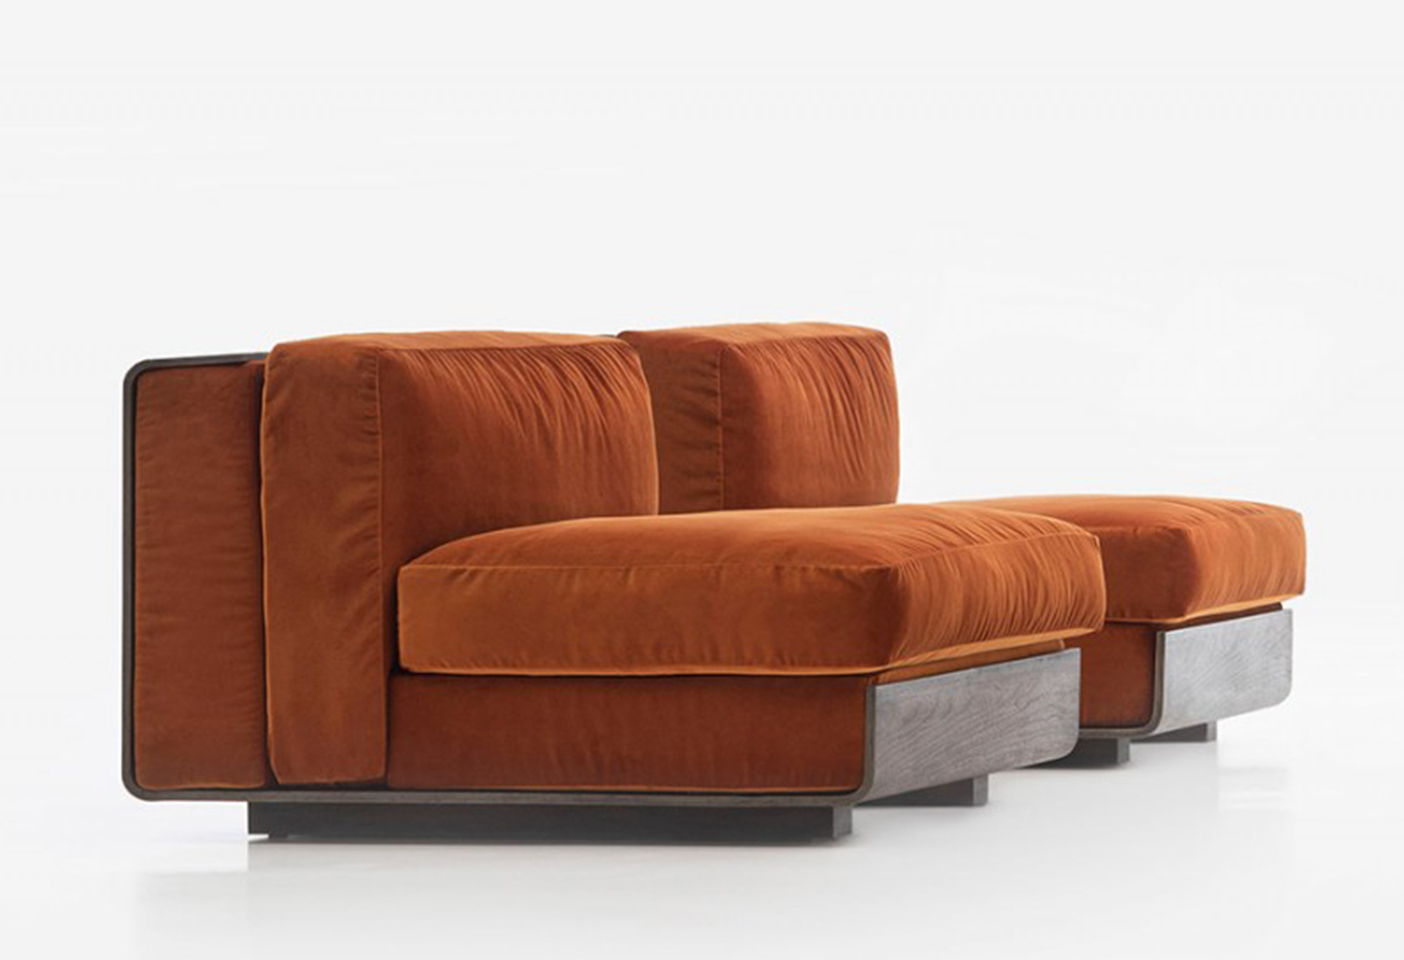 The multifaceted Life sofa first designed in 1974 and re-released by Acerbis in 2019 for their ‘Remasters' collection. Photo c/o Acerbis. 